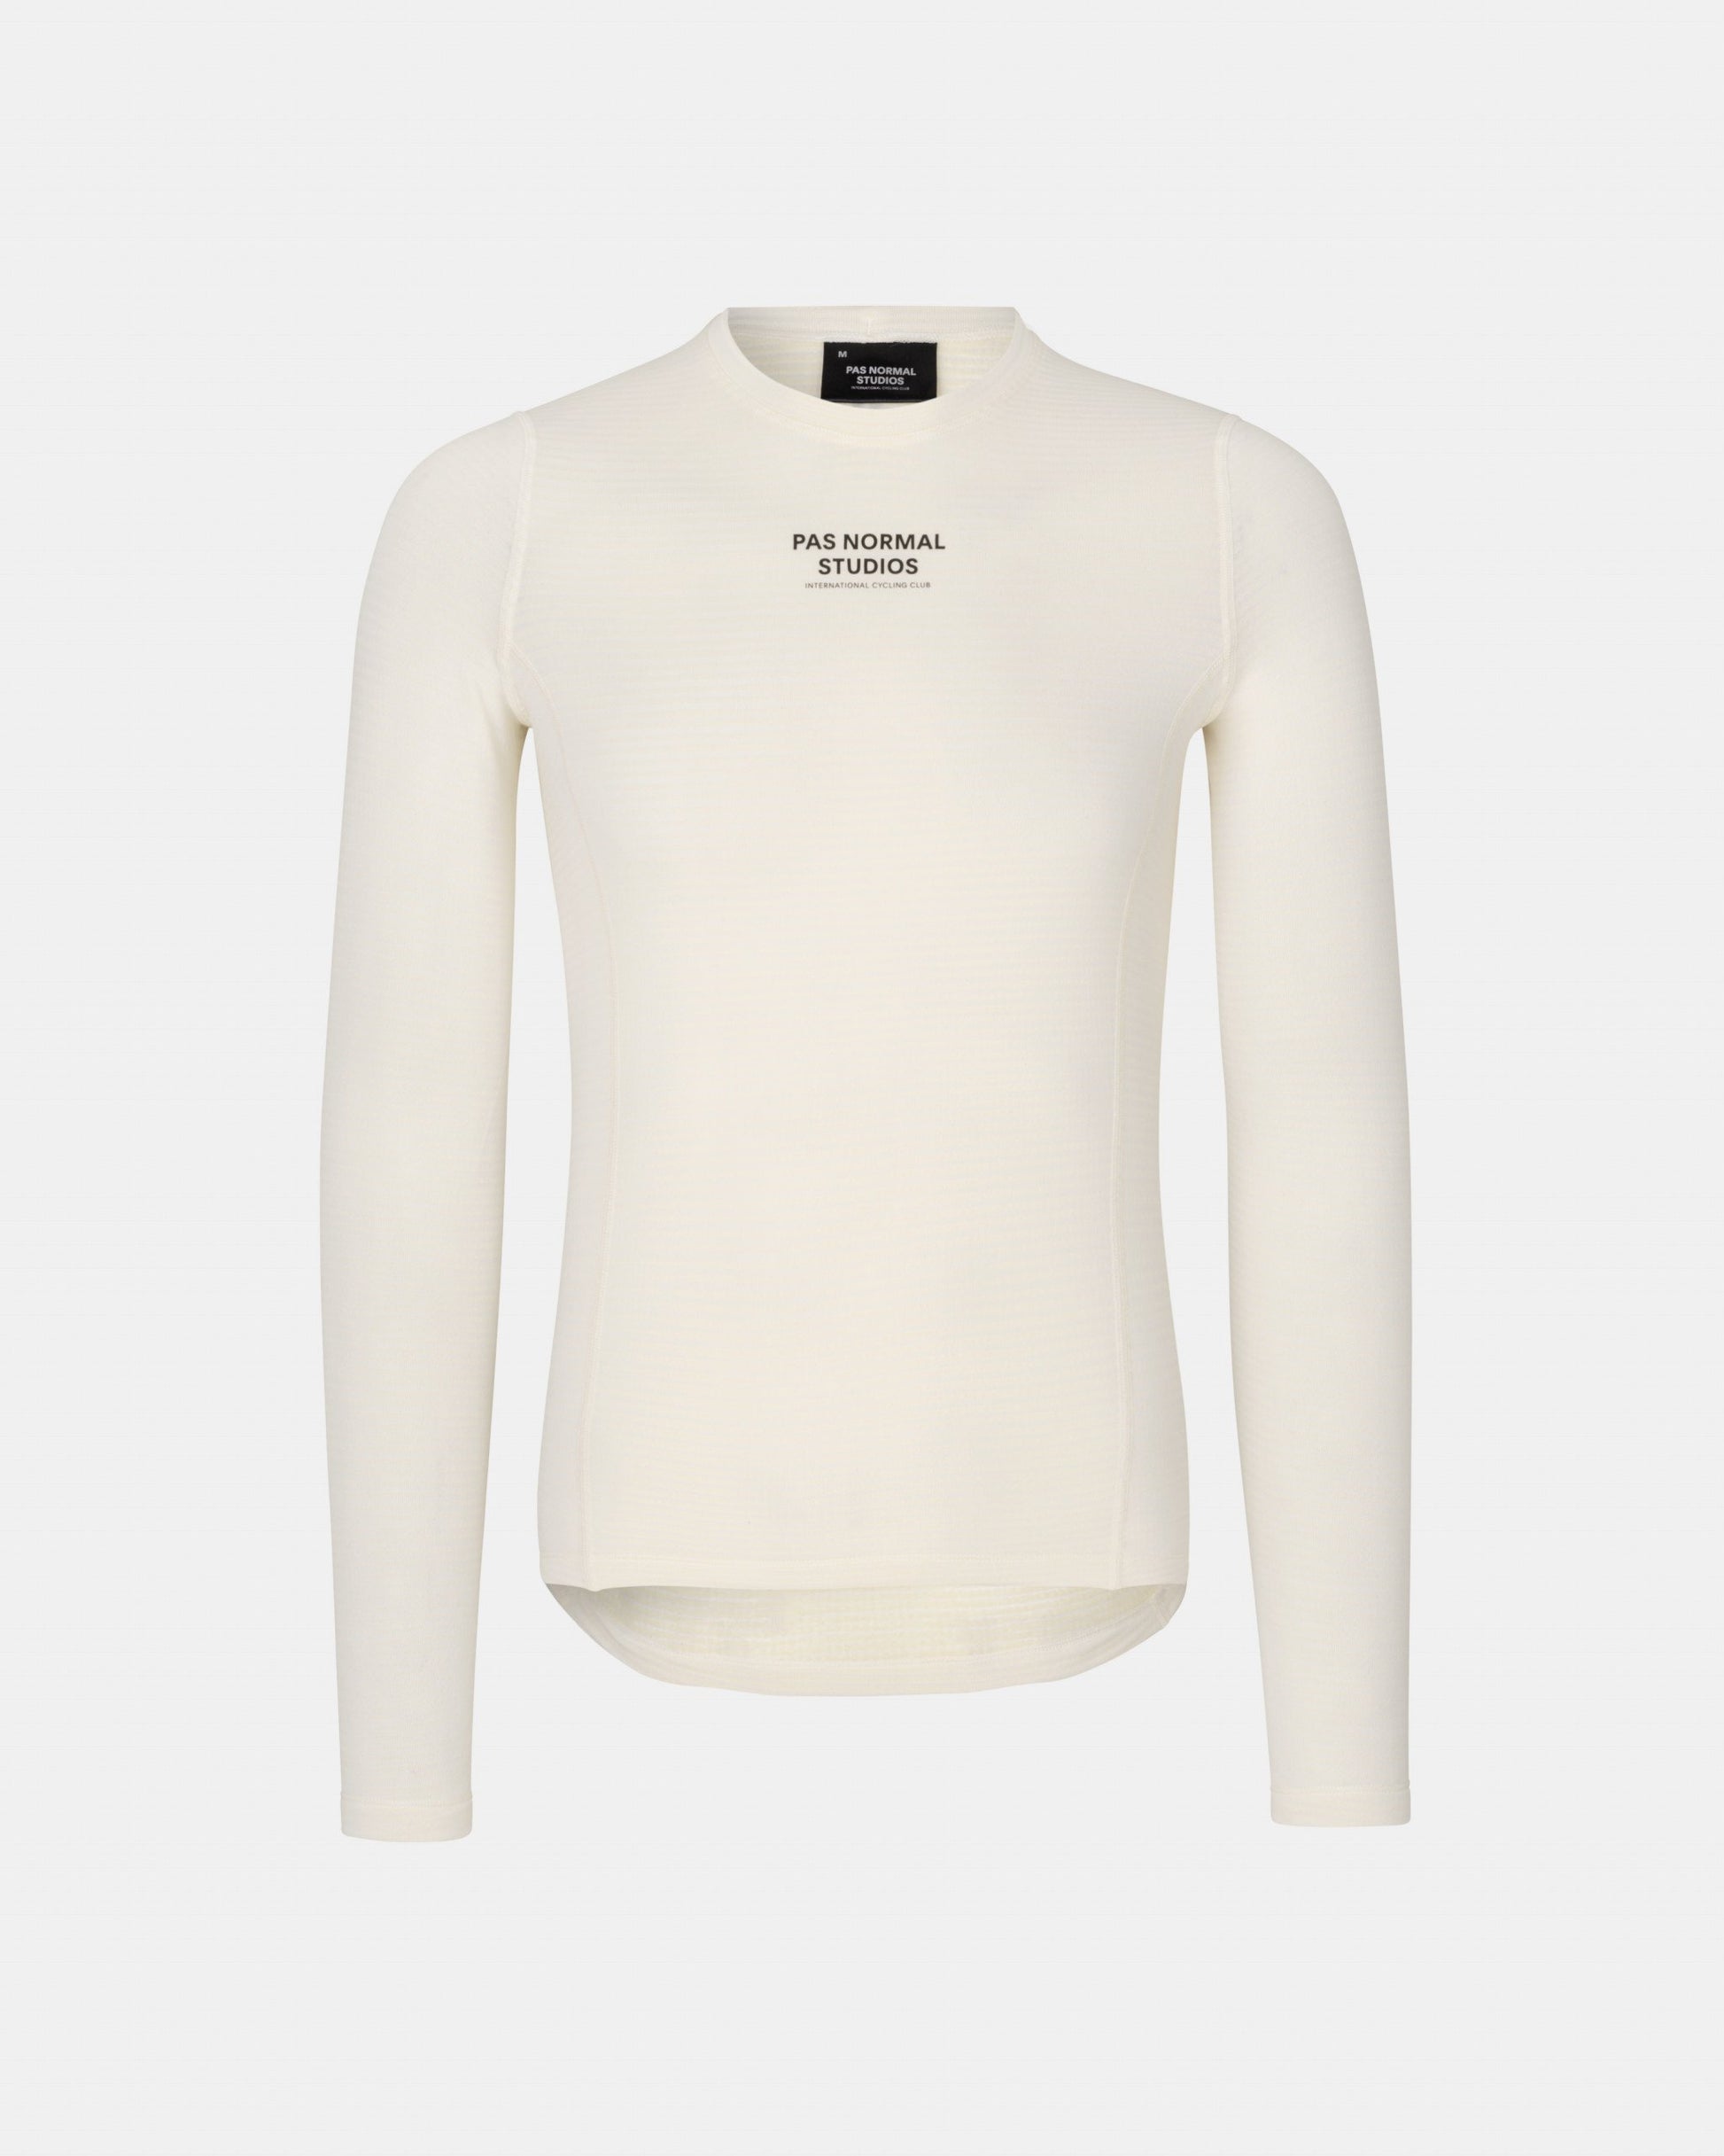 Long-sleeved base layer Control Heavy Off-white Base Layers warm Pas Normal Studios 